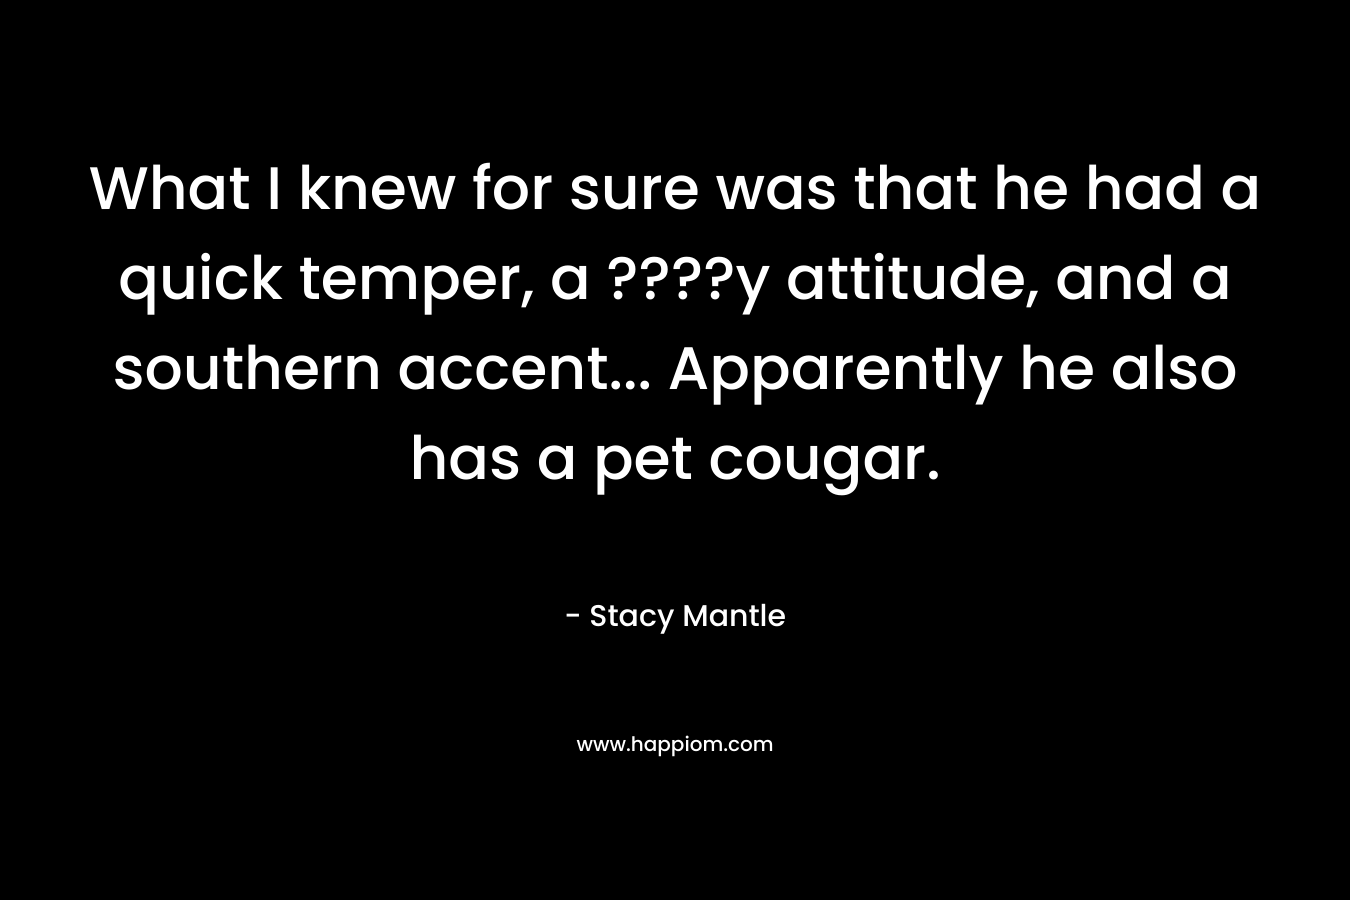 What I knew for sure was that he had a quick temper, a ????y attitude, and a southern accent… Apparently he also has a pet cougar. – Stacy Mantle